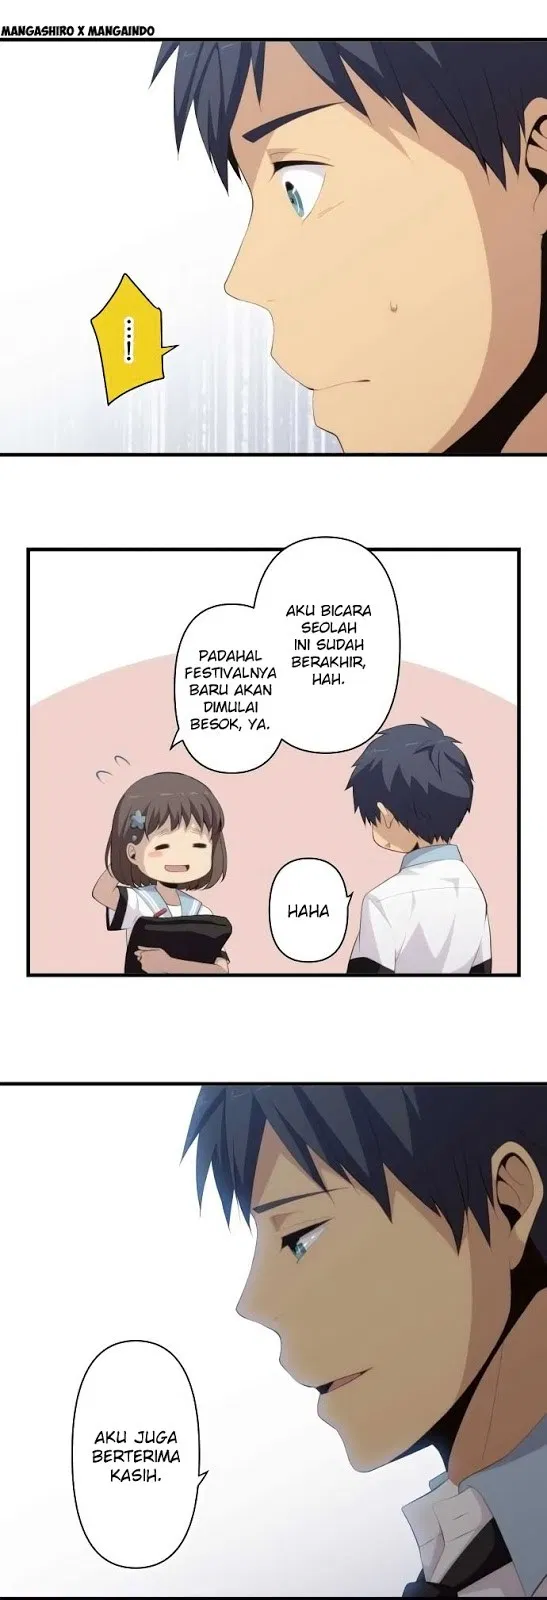 ReLIFE Chapter 143